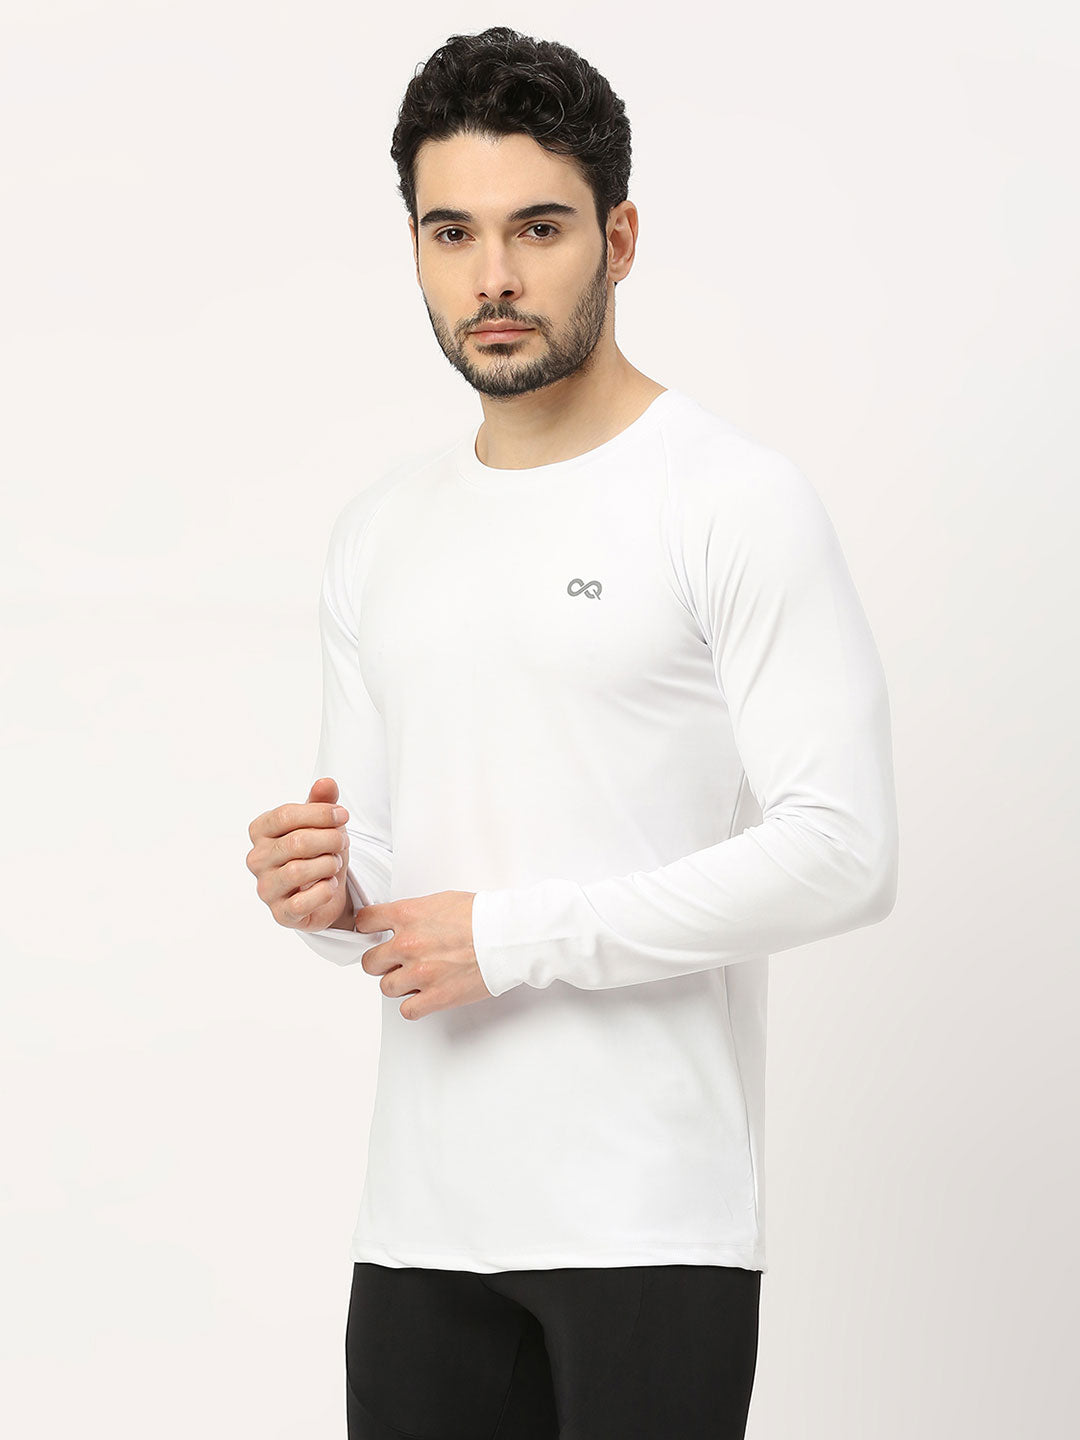 Basic Cotton T-Shirt Long Sleeve Plain Crew Neck Solid Men Youth Blank Color